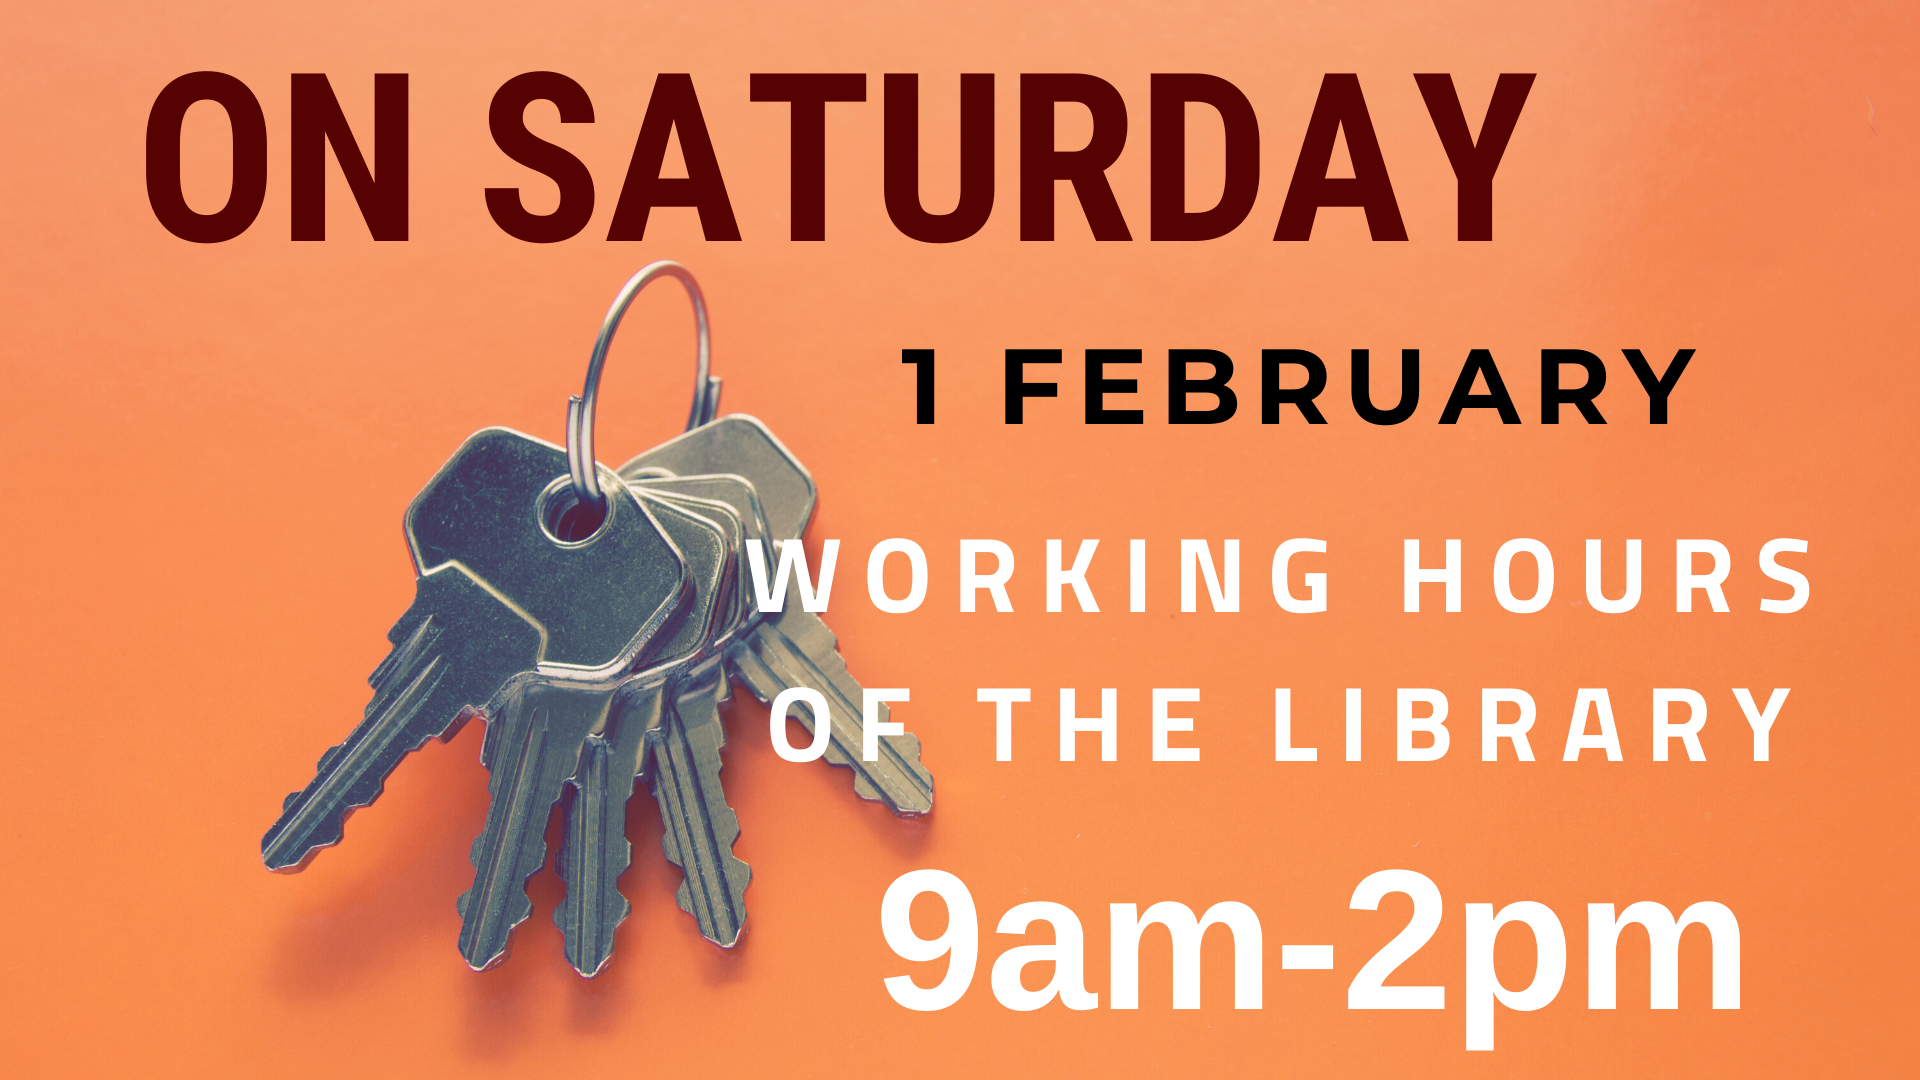 On Saturday 1 February our library is open from 9am until 2pm